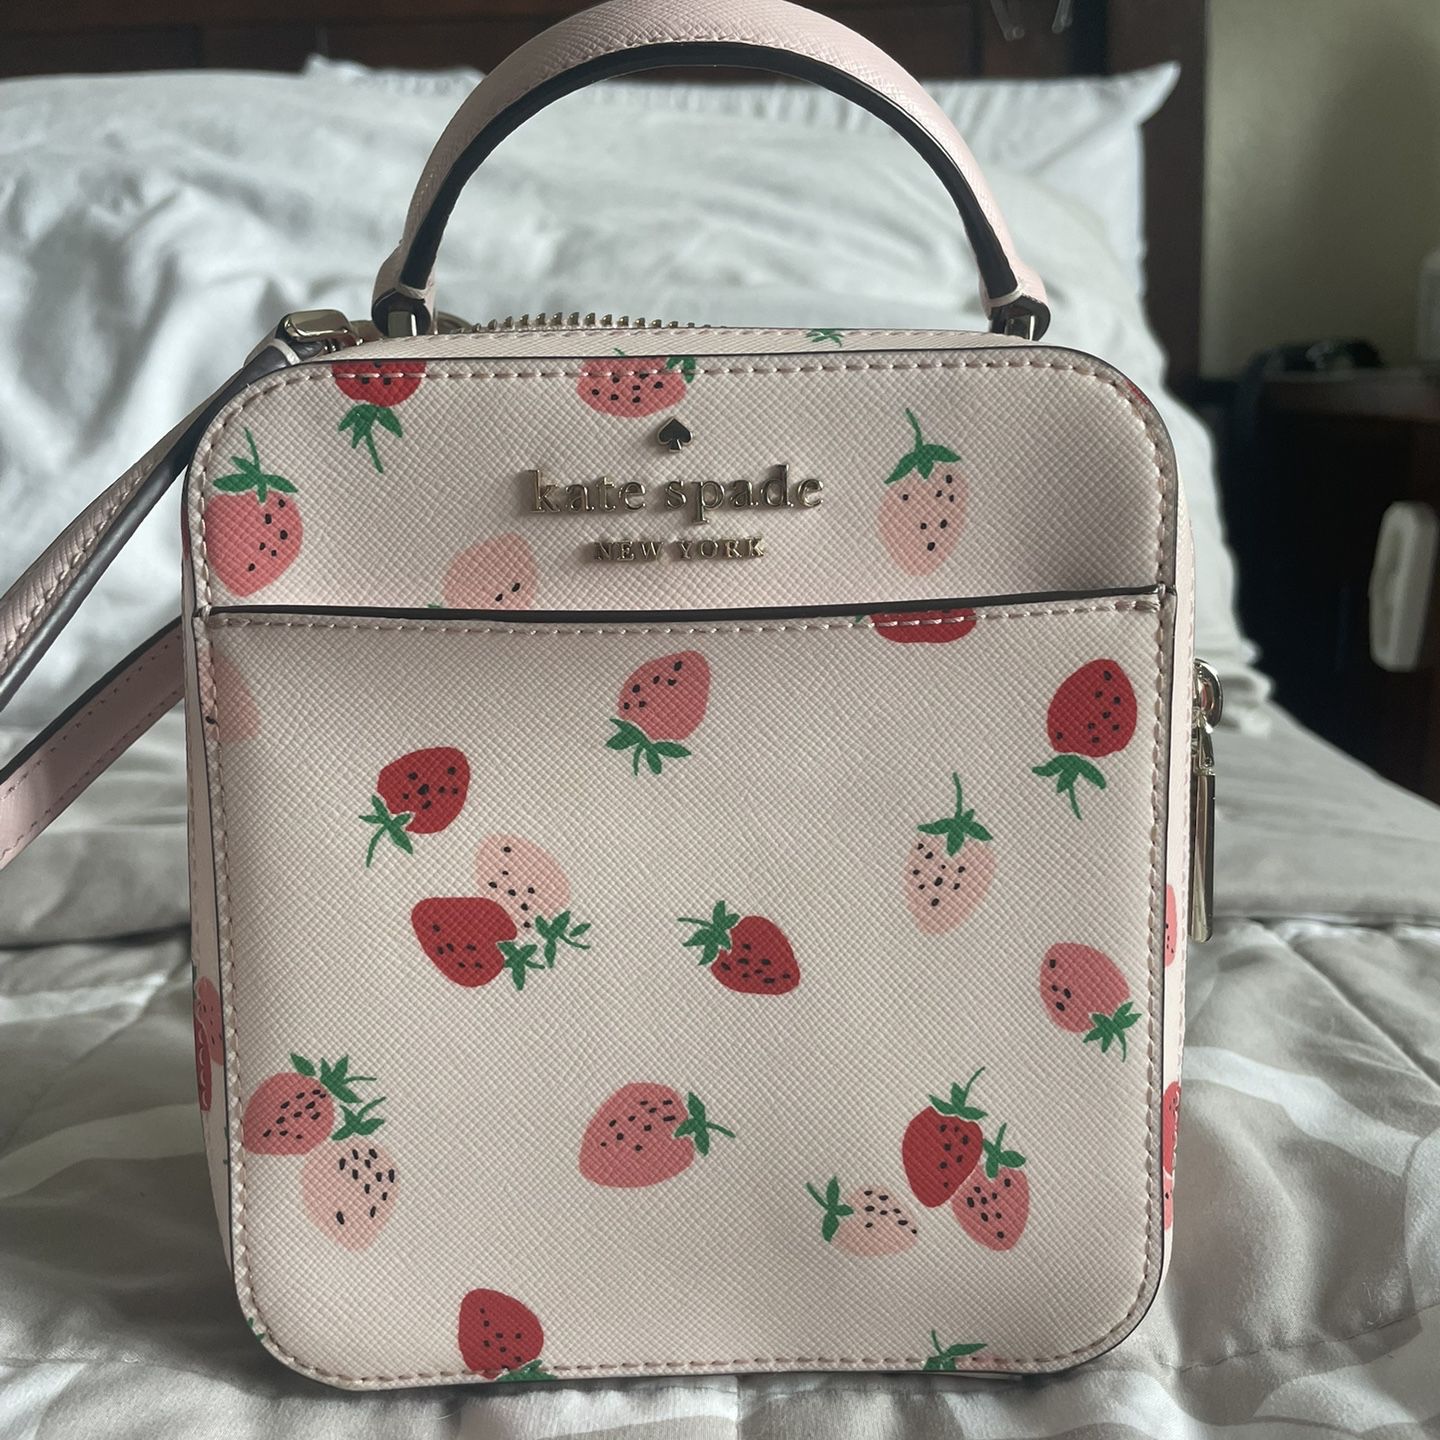 Kate Spade Love Shack Heart Bag for Sale in Anaheim, CA - OfferUp